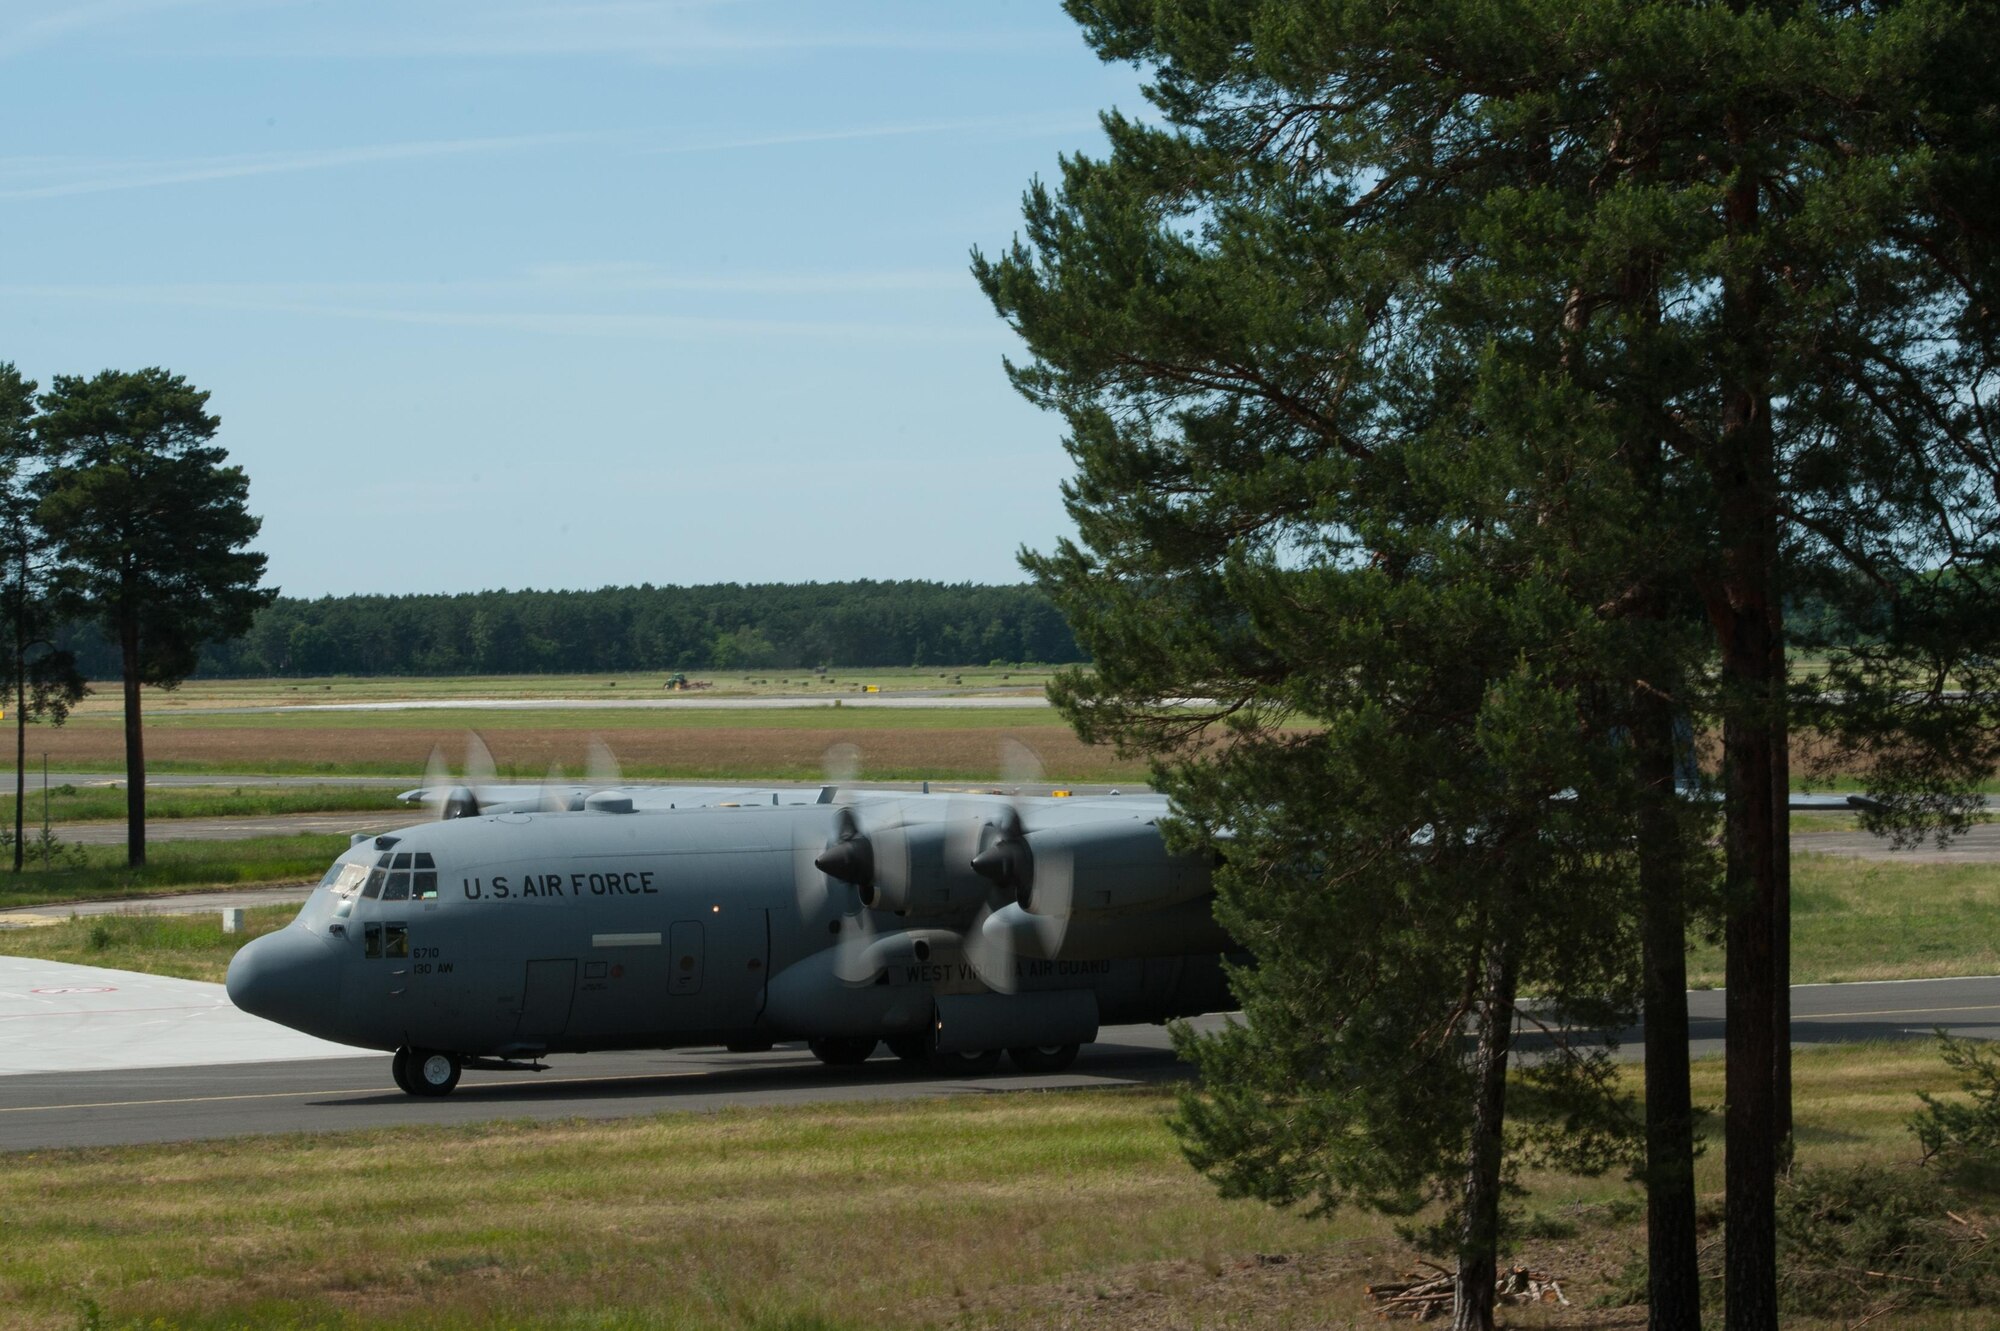 A U.S. Air Force C-130H Hercules from the West Virginia Air National Guard arrives at the Bydgoszcz Airport, Poland, to pick up Soldiers from the 82nd Airborne Division and their cargo during Exercise Swift Response 16, June 9, 2016. Exercise SR16 is one of the premier military crisis response training events for multinational airborne forces in the world, the exercise has more than 5,000 participants from 10 NATO nations. (U.S. Air Force photo by Master Sgt. Joseph Swafford/Released)